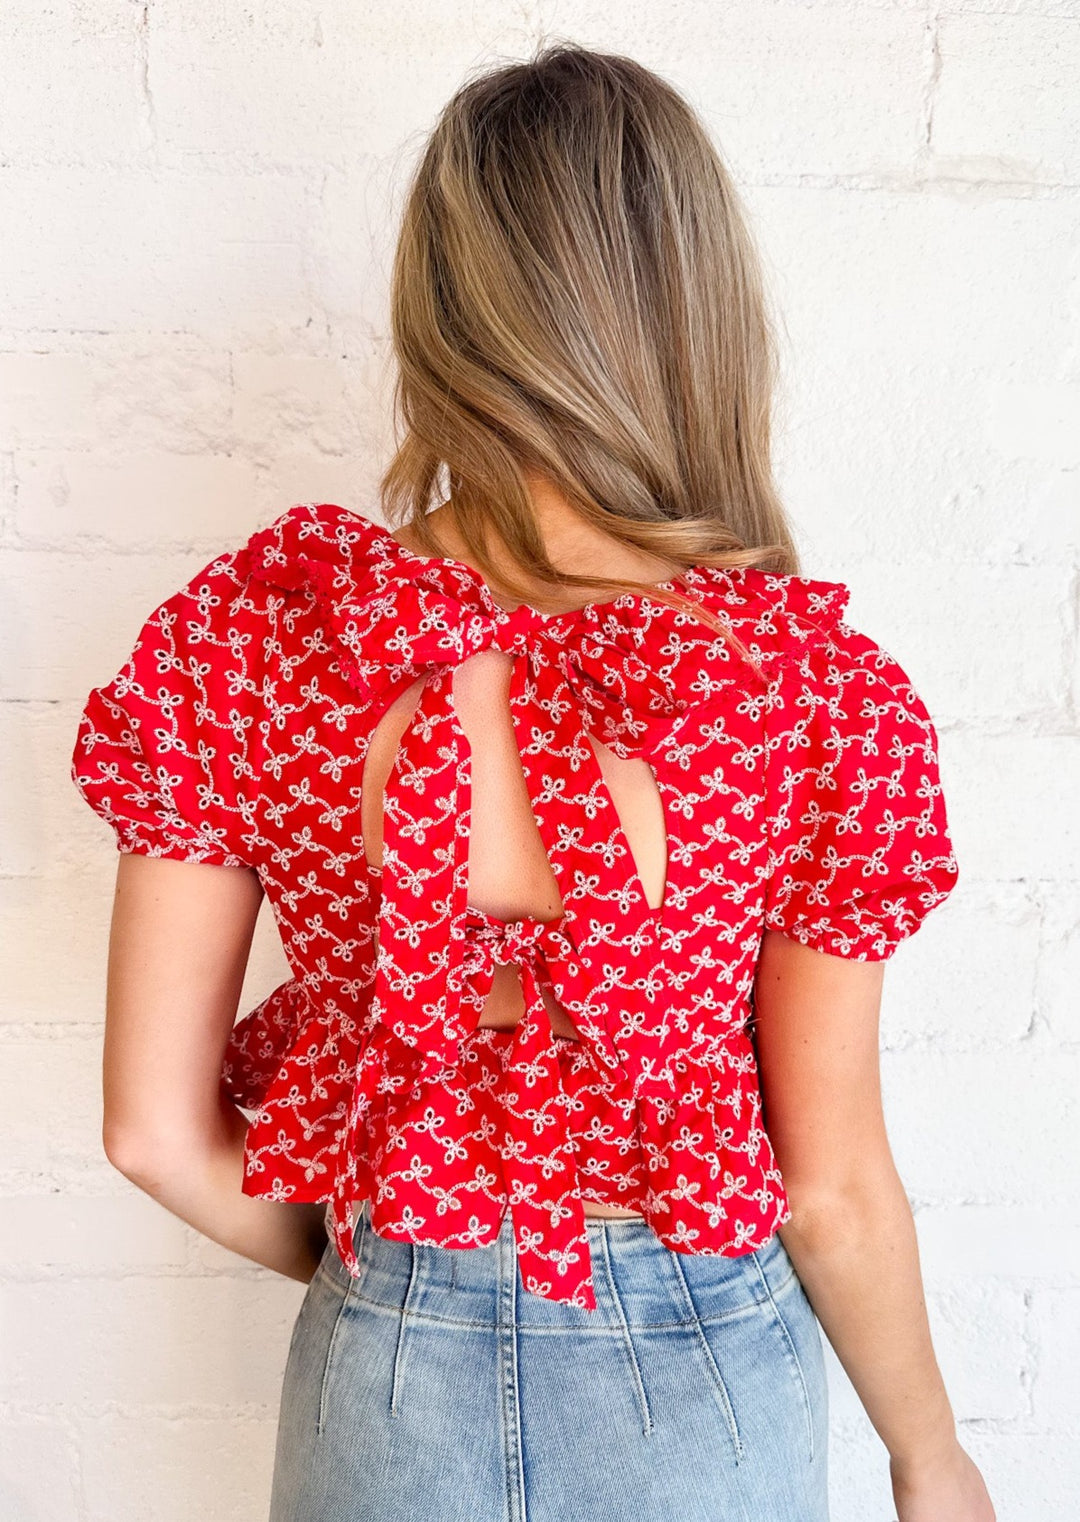 Ruby Ruffle Top, Tops, Adeline, Adeline, dallas boutique, dallas texas, texas boutique, women's boutique dallas, adeline boutique, dallas boutique, trendy boutique, affordable boutique